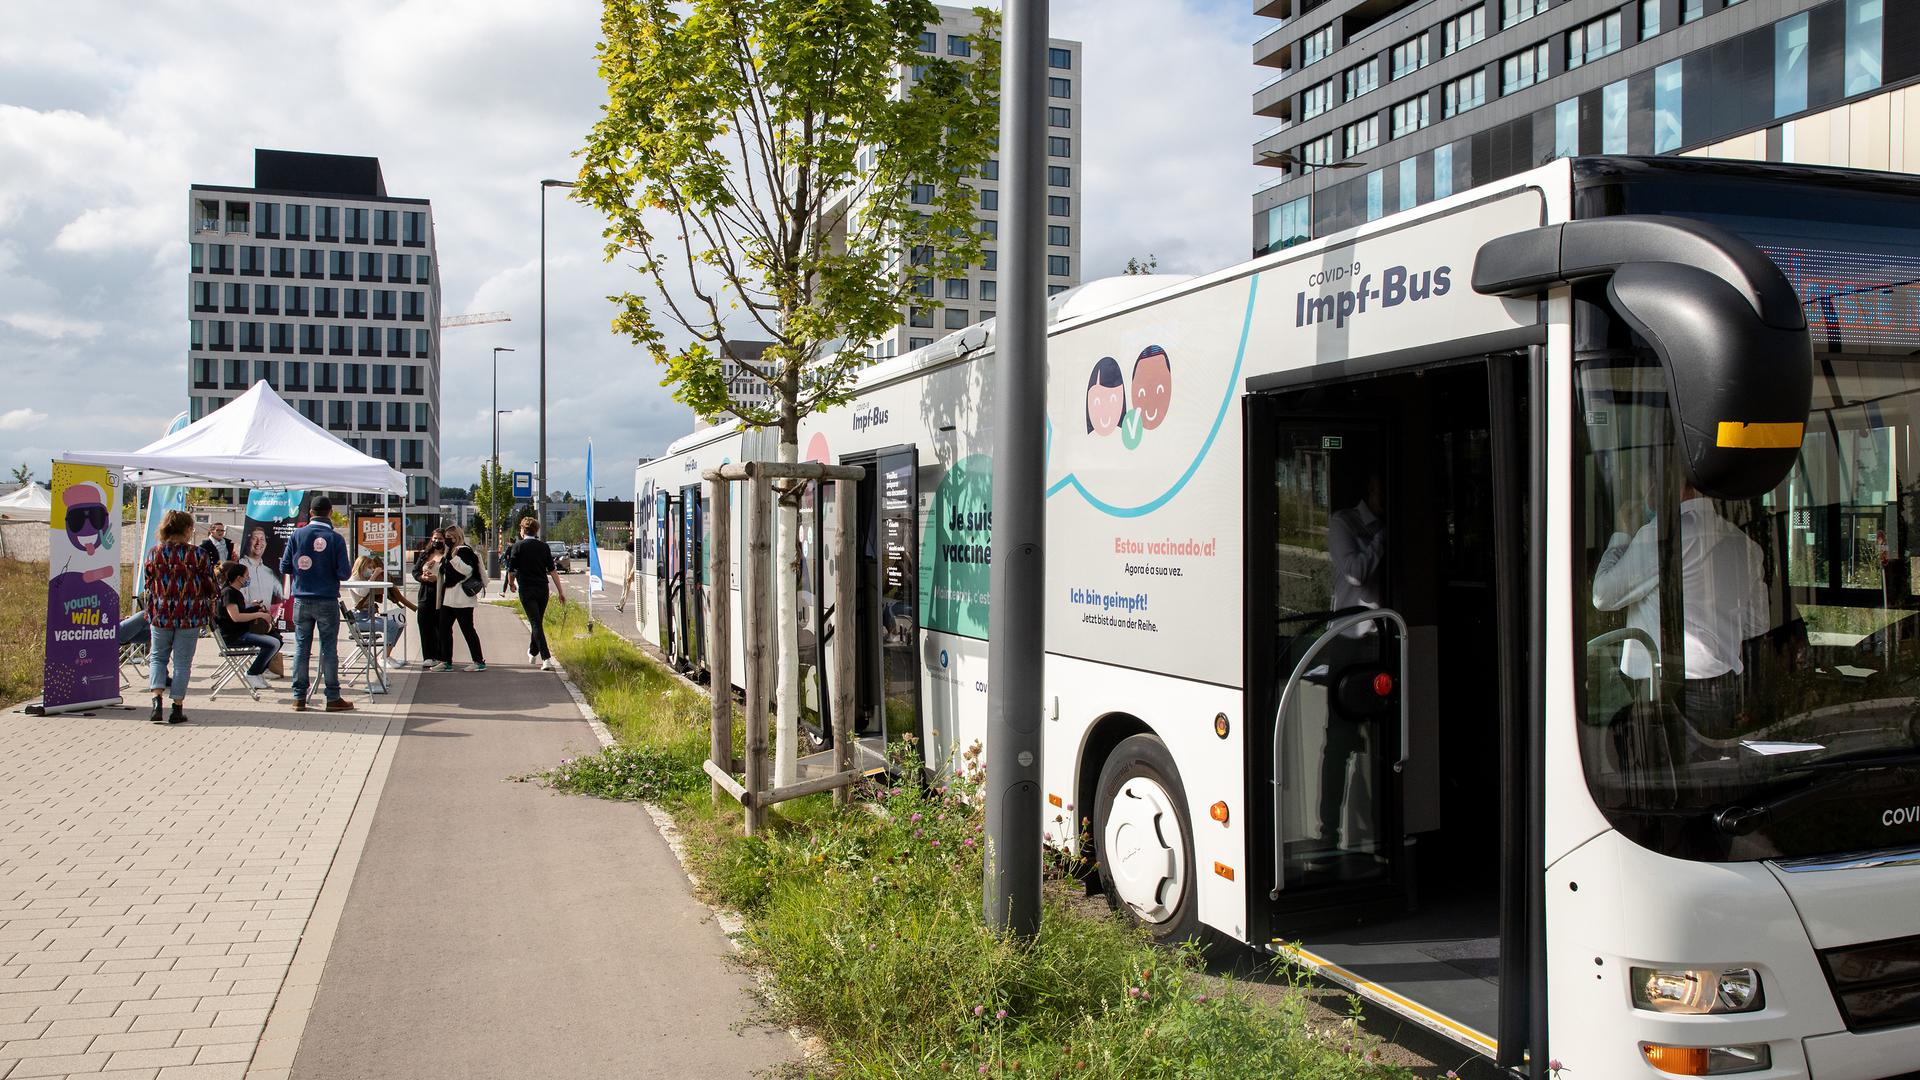 Luxembourg's vaccination bus is one of the measures the country uses to encourage people to get jabbed